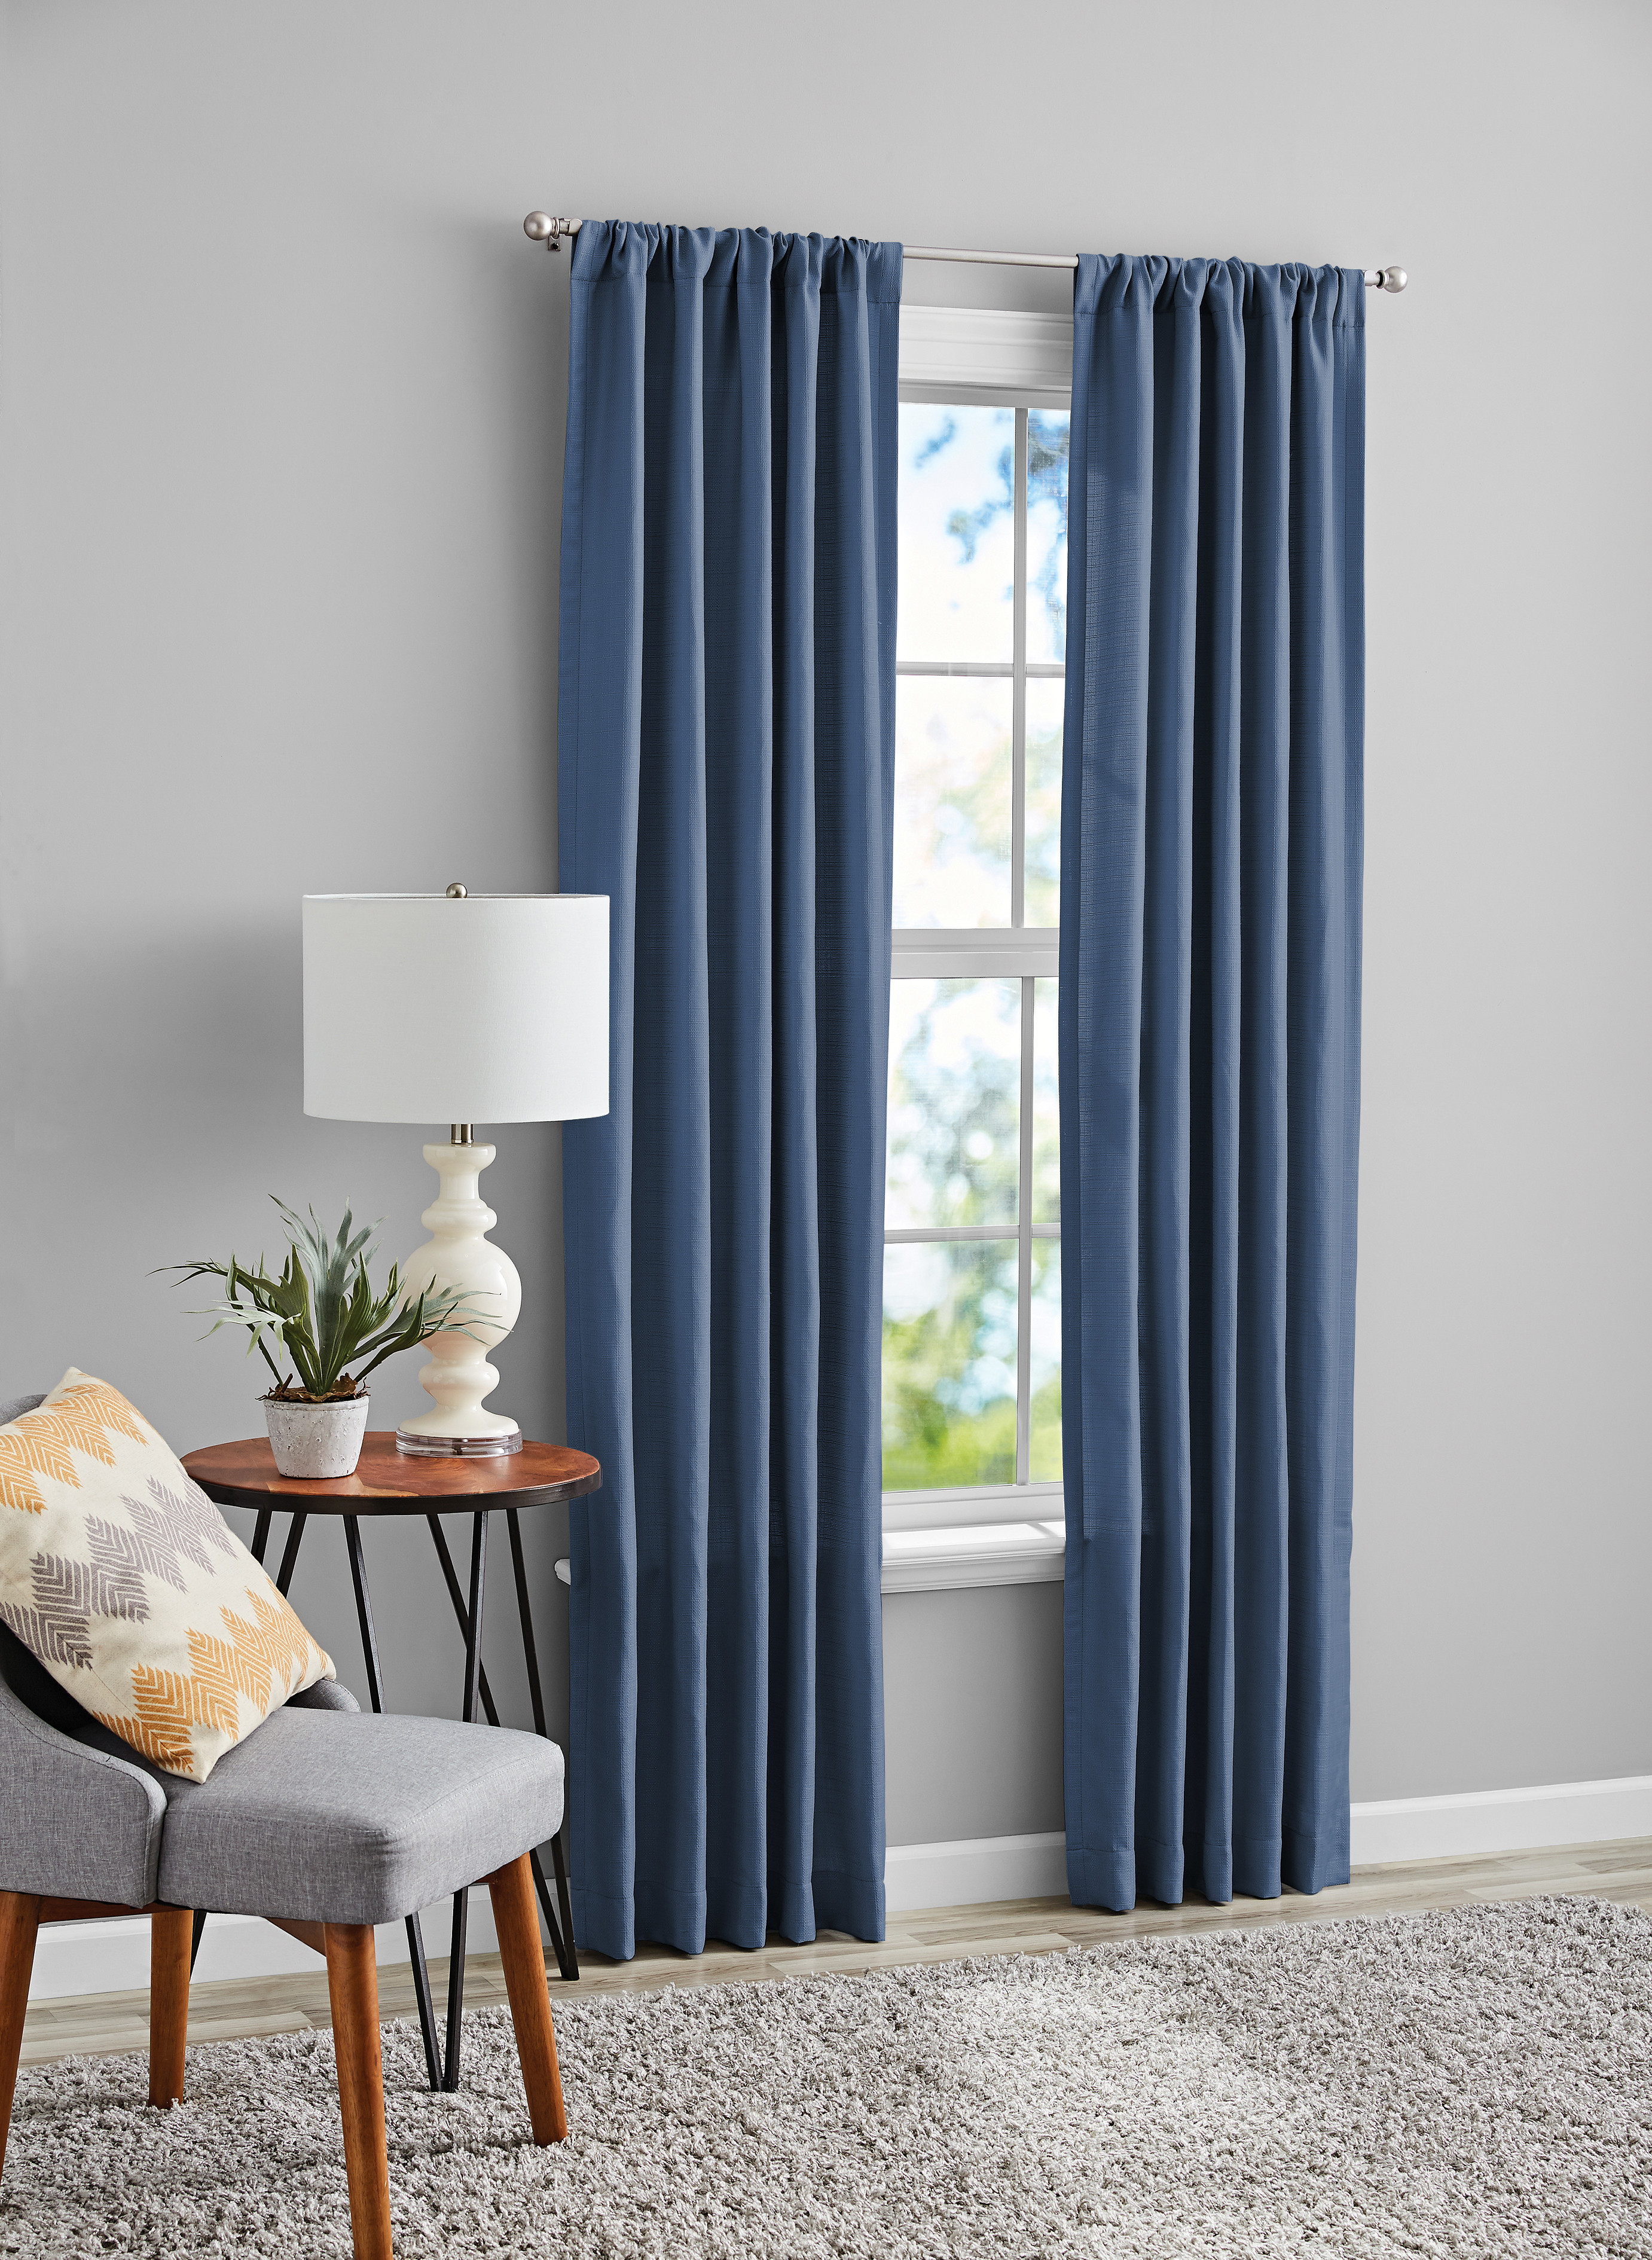 Mainstays Southport Solid Color Light Filtering Rod Pocket Curtain Panel Pair, Set of 2, Blue, 40 x 84 - image 1 of 5